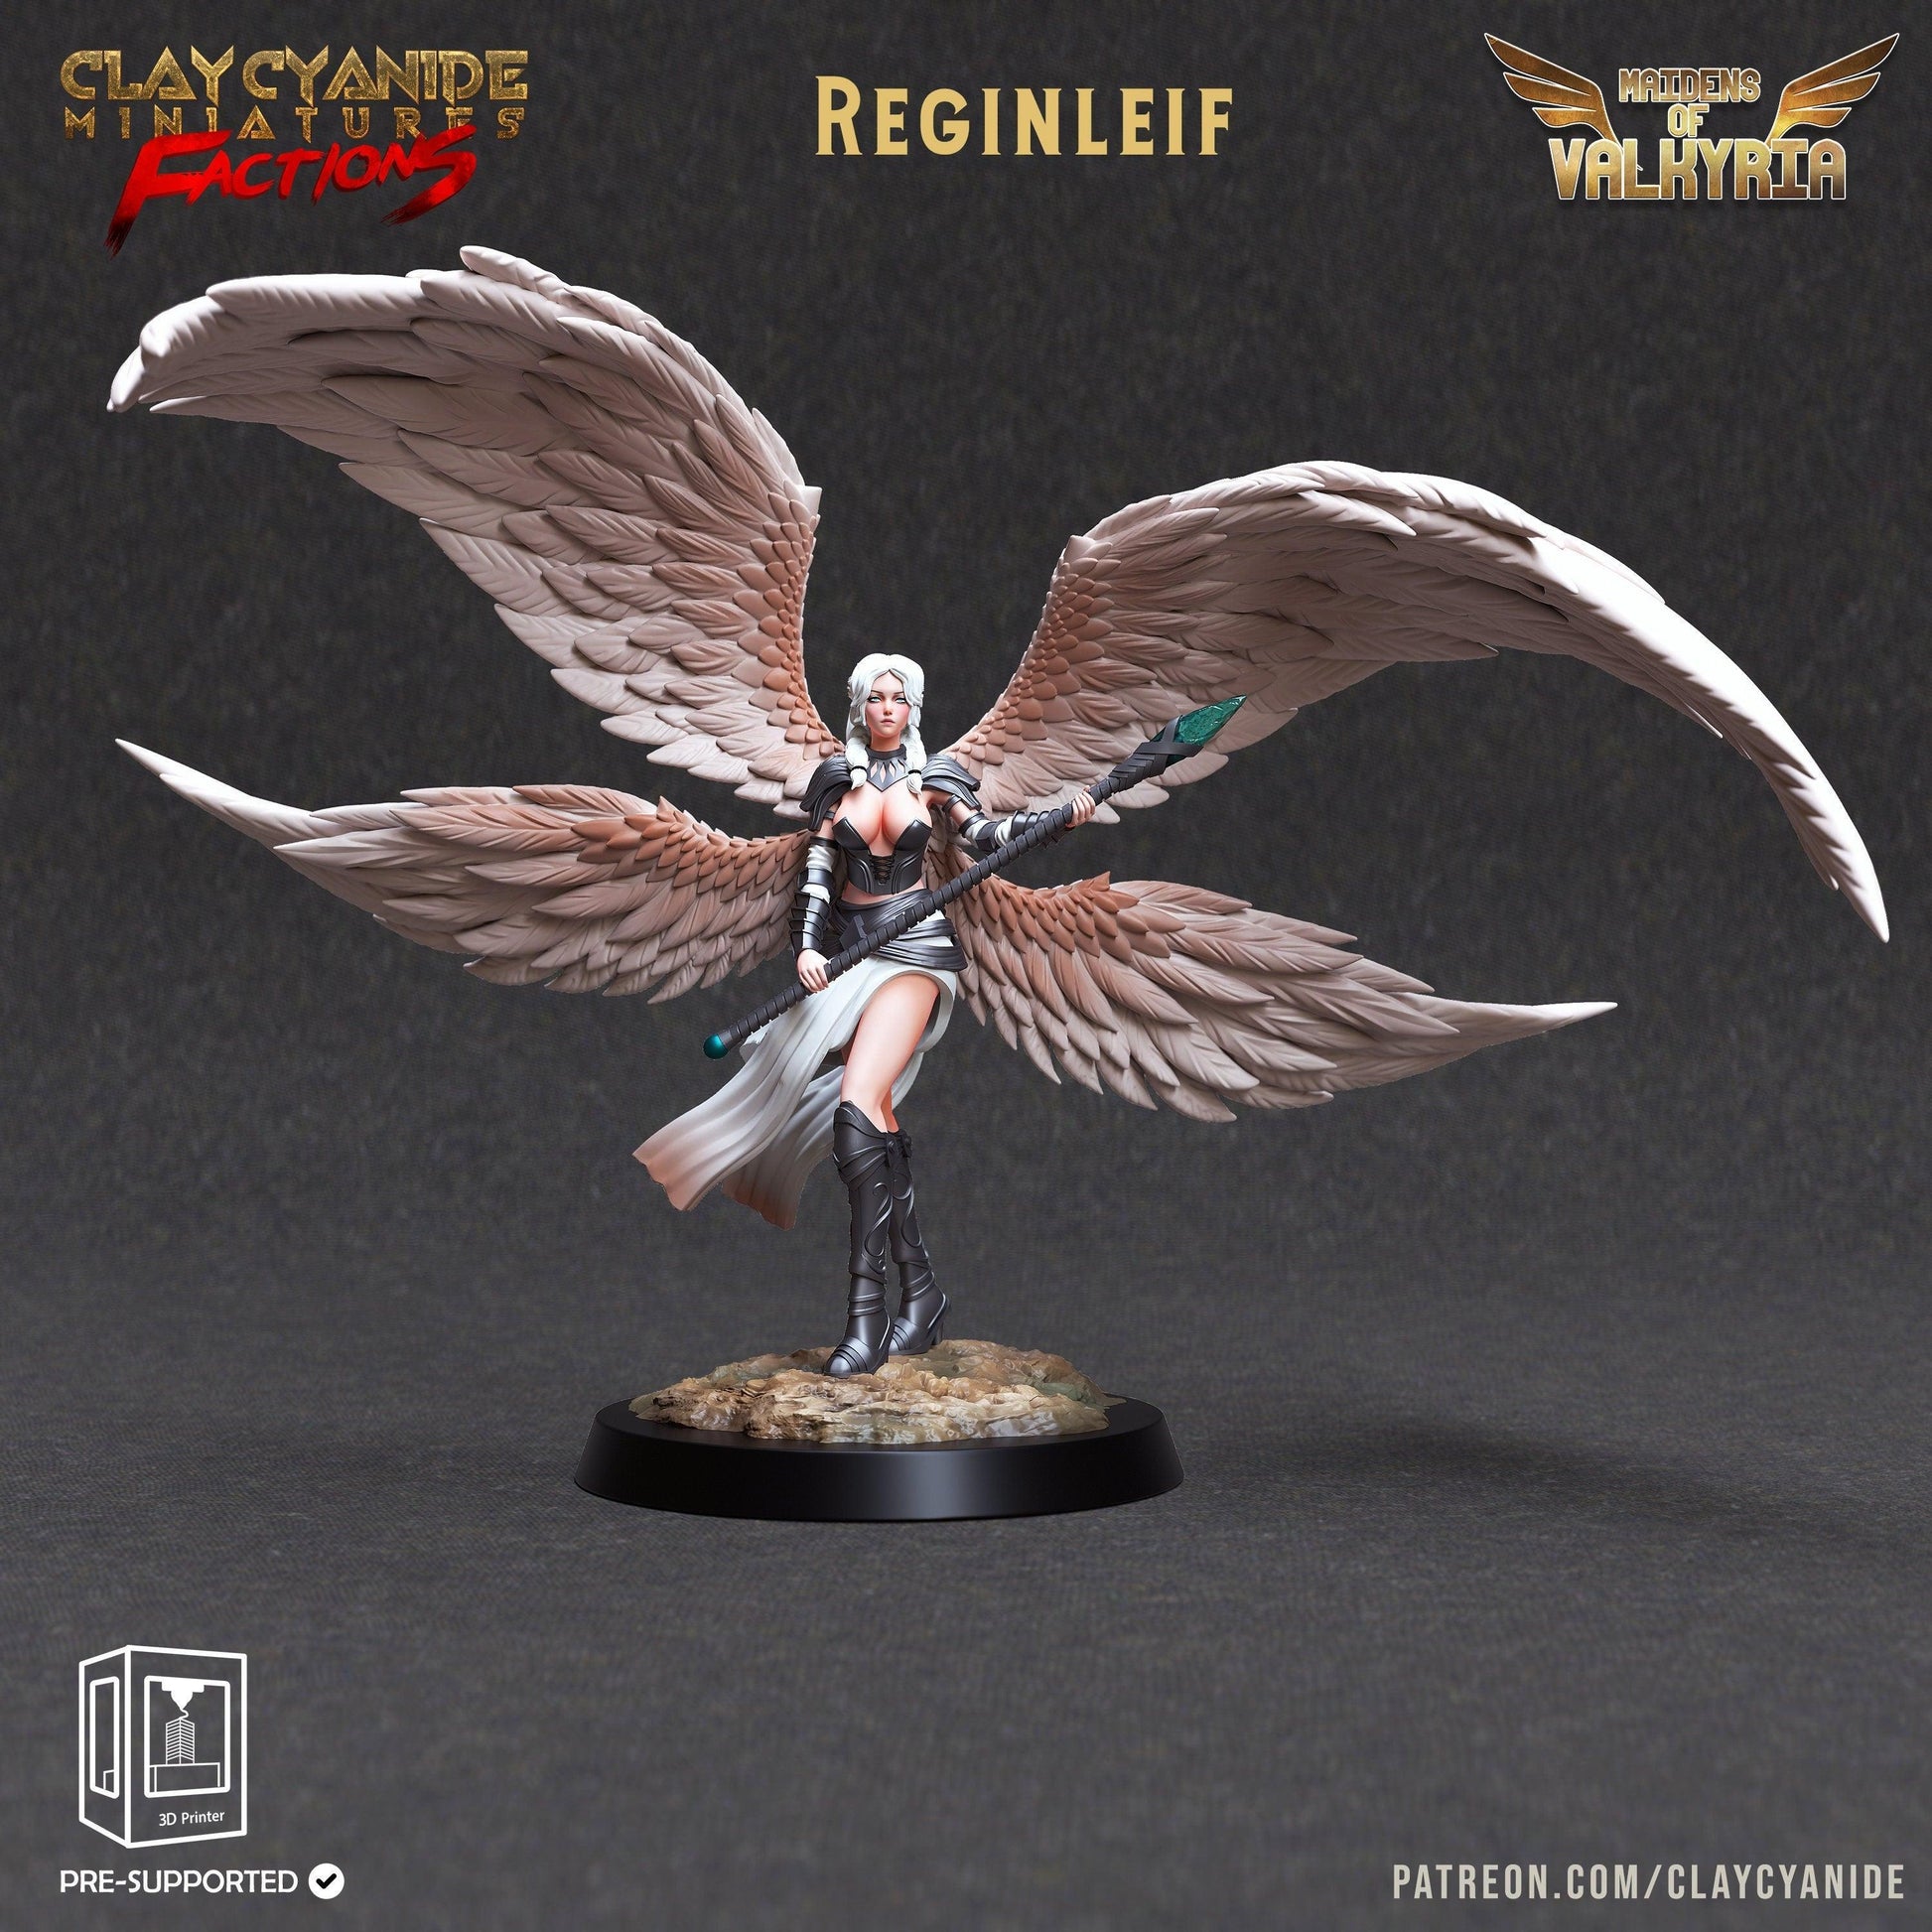 Valkyrie Viking Miniature | Reginleif Clay Cyanide | Maidens of Valkyria | Tabletop Gaming | DnD Miniature | Dungeons and Dragons - Plague Miniatures shop for DnD Miniatures